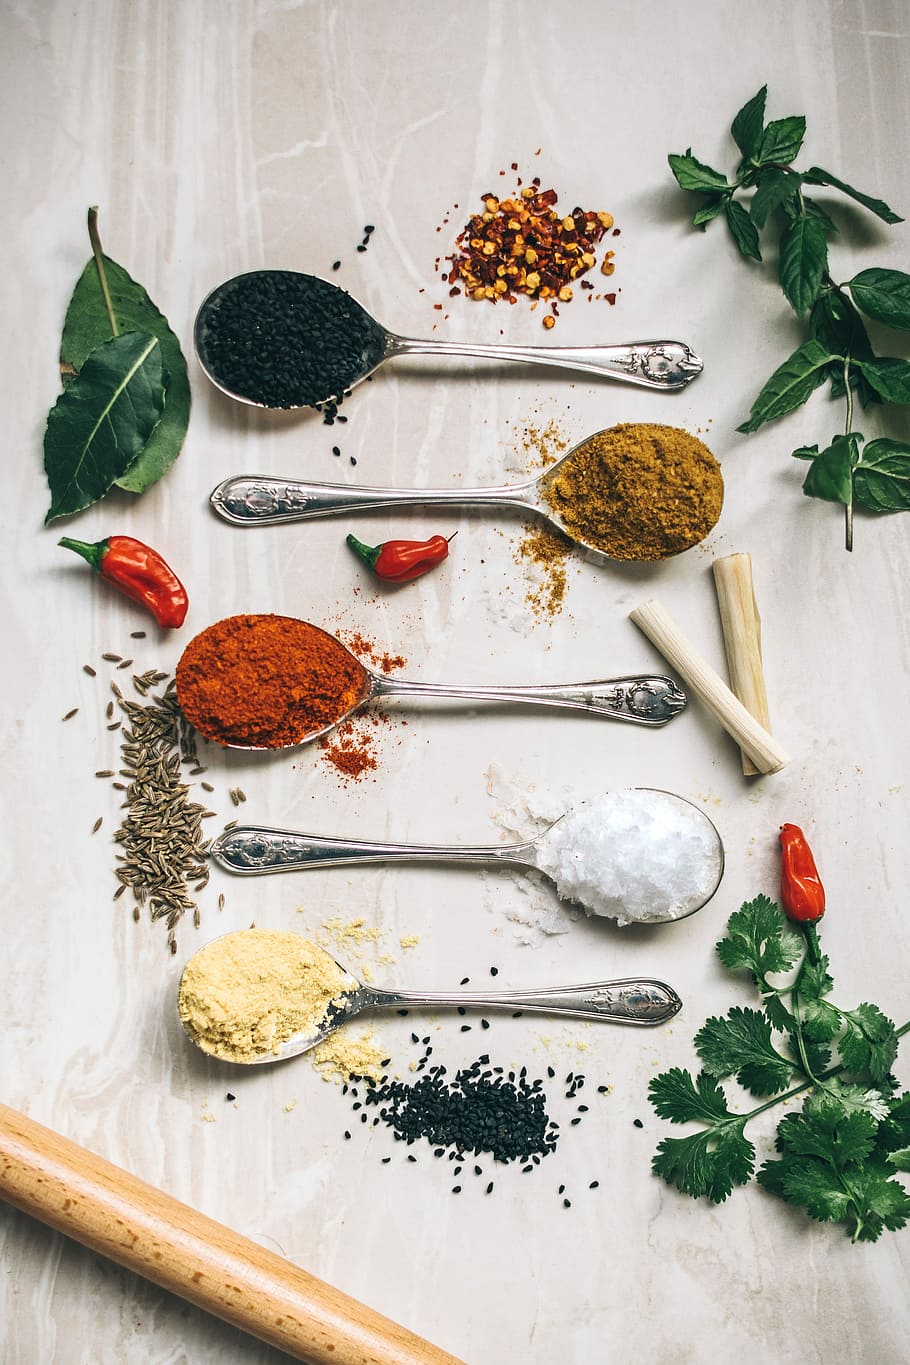 five gray spoons filled with assorted-color powders near chilli, flat lay photography of spoons filled with spice powders on furniture board